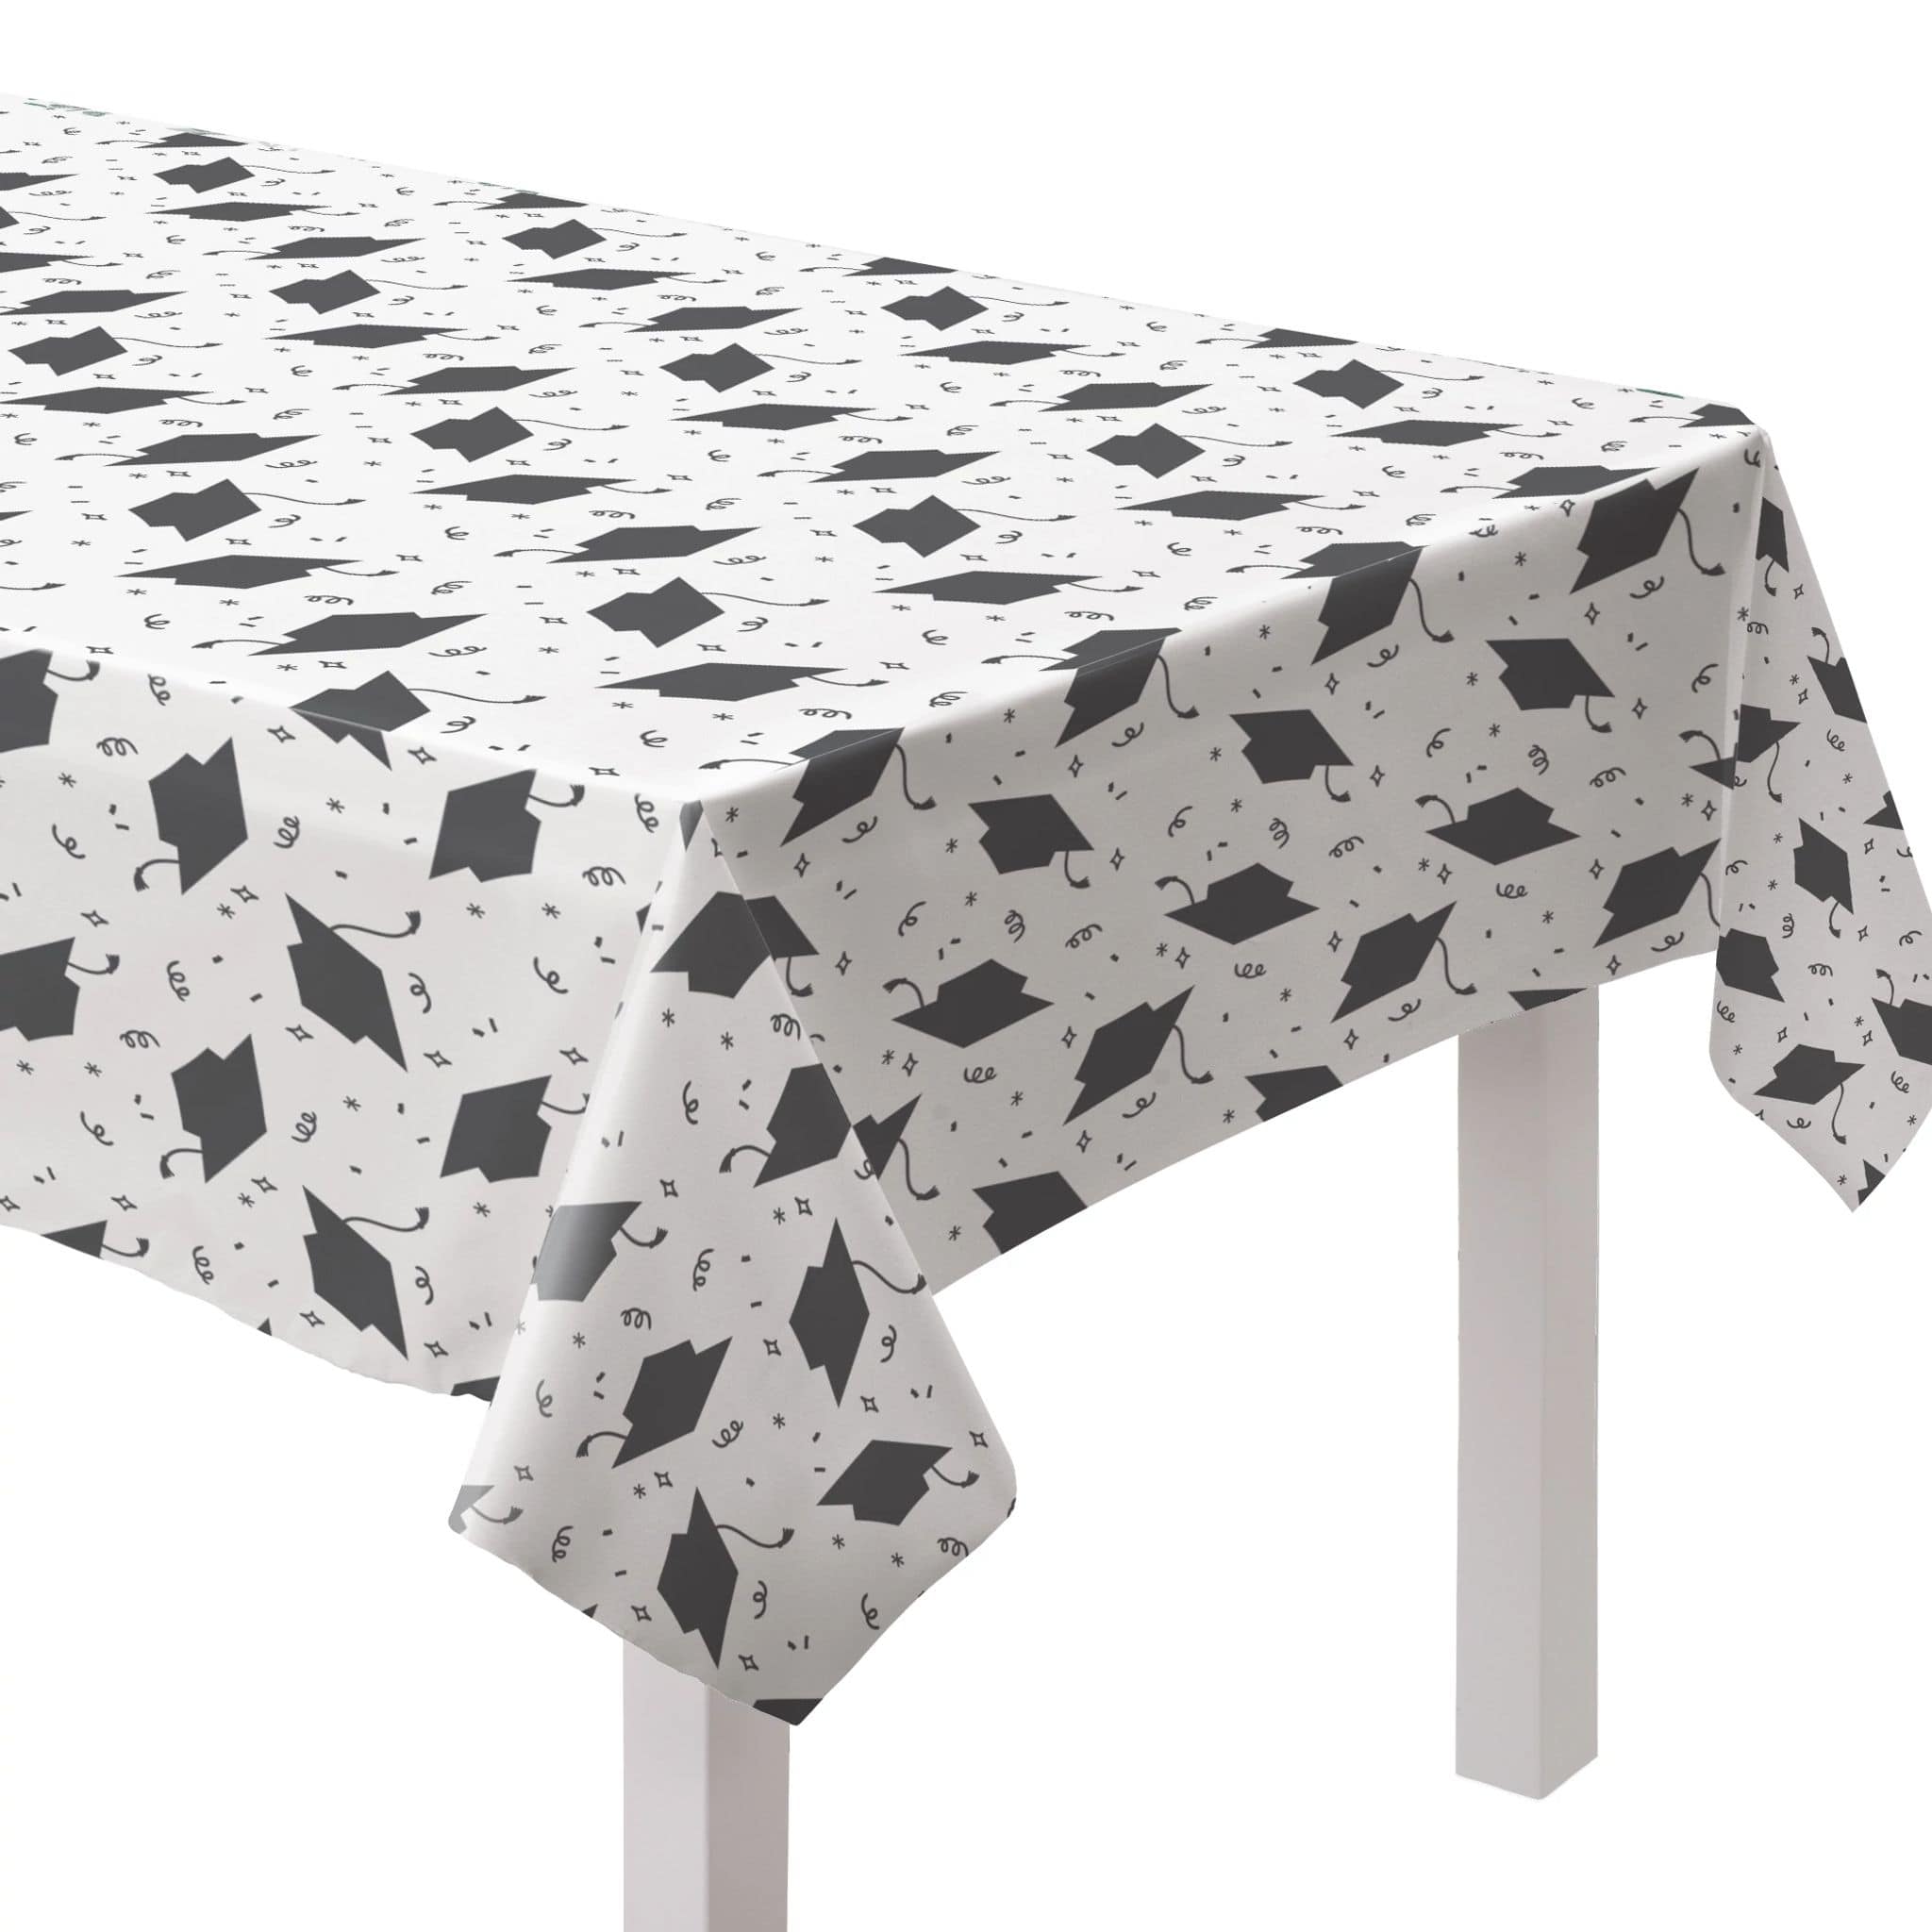 7.5ft. Graduation Cap Flannel-Backed Vinyl Table Cover, 2ct.